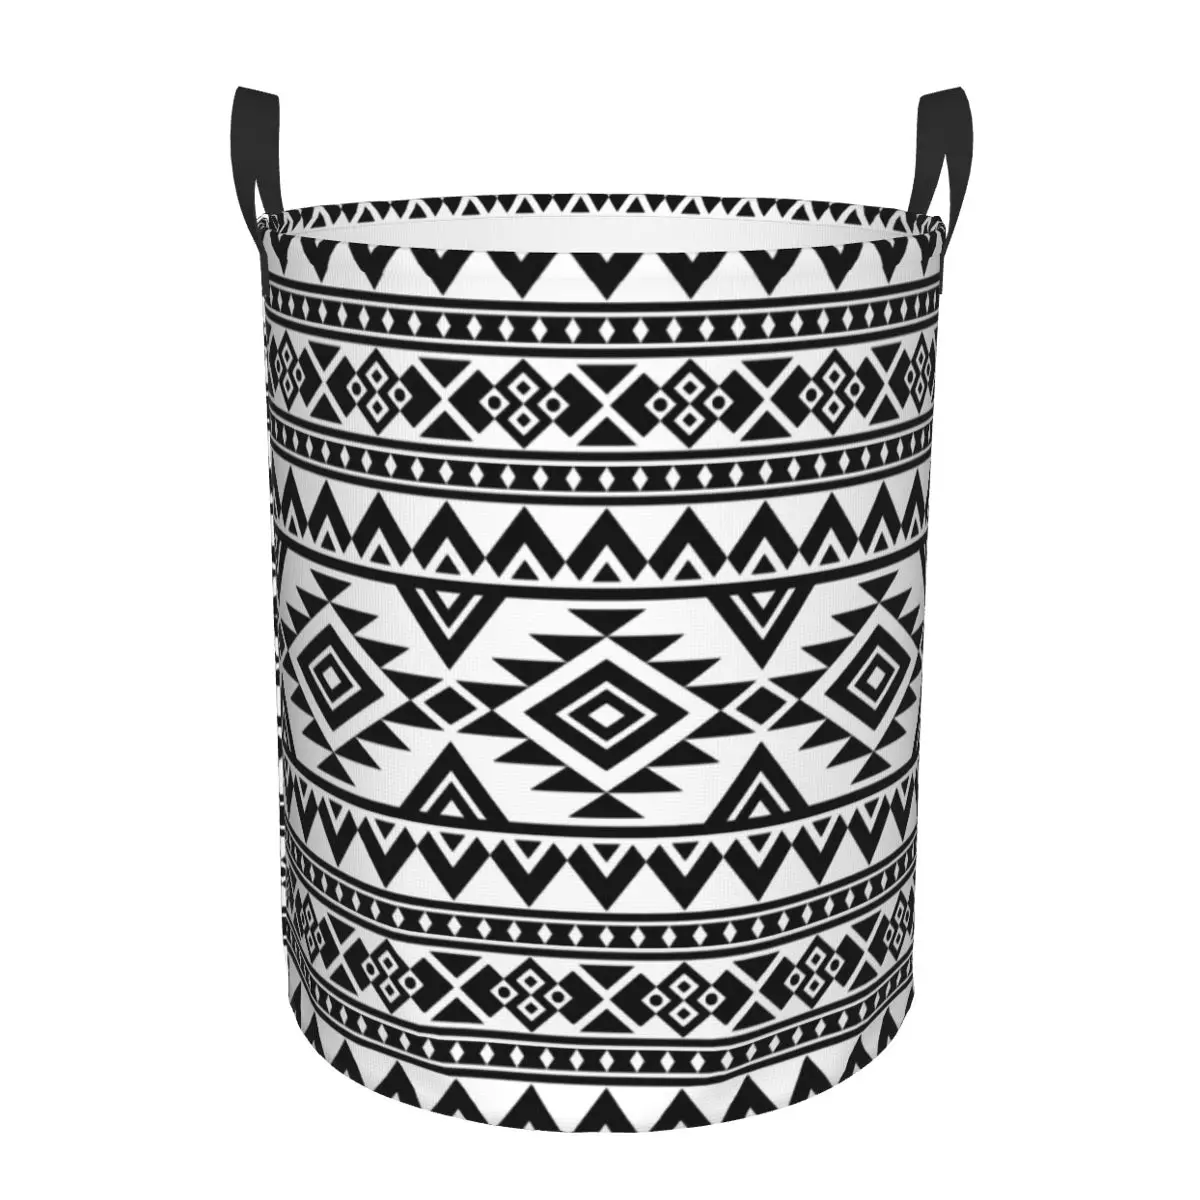 

Foldable Laundry Basket for Dirty Clothes Black And White Tribal Pattern Storage Hamper Kids Baby Home Organizer